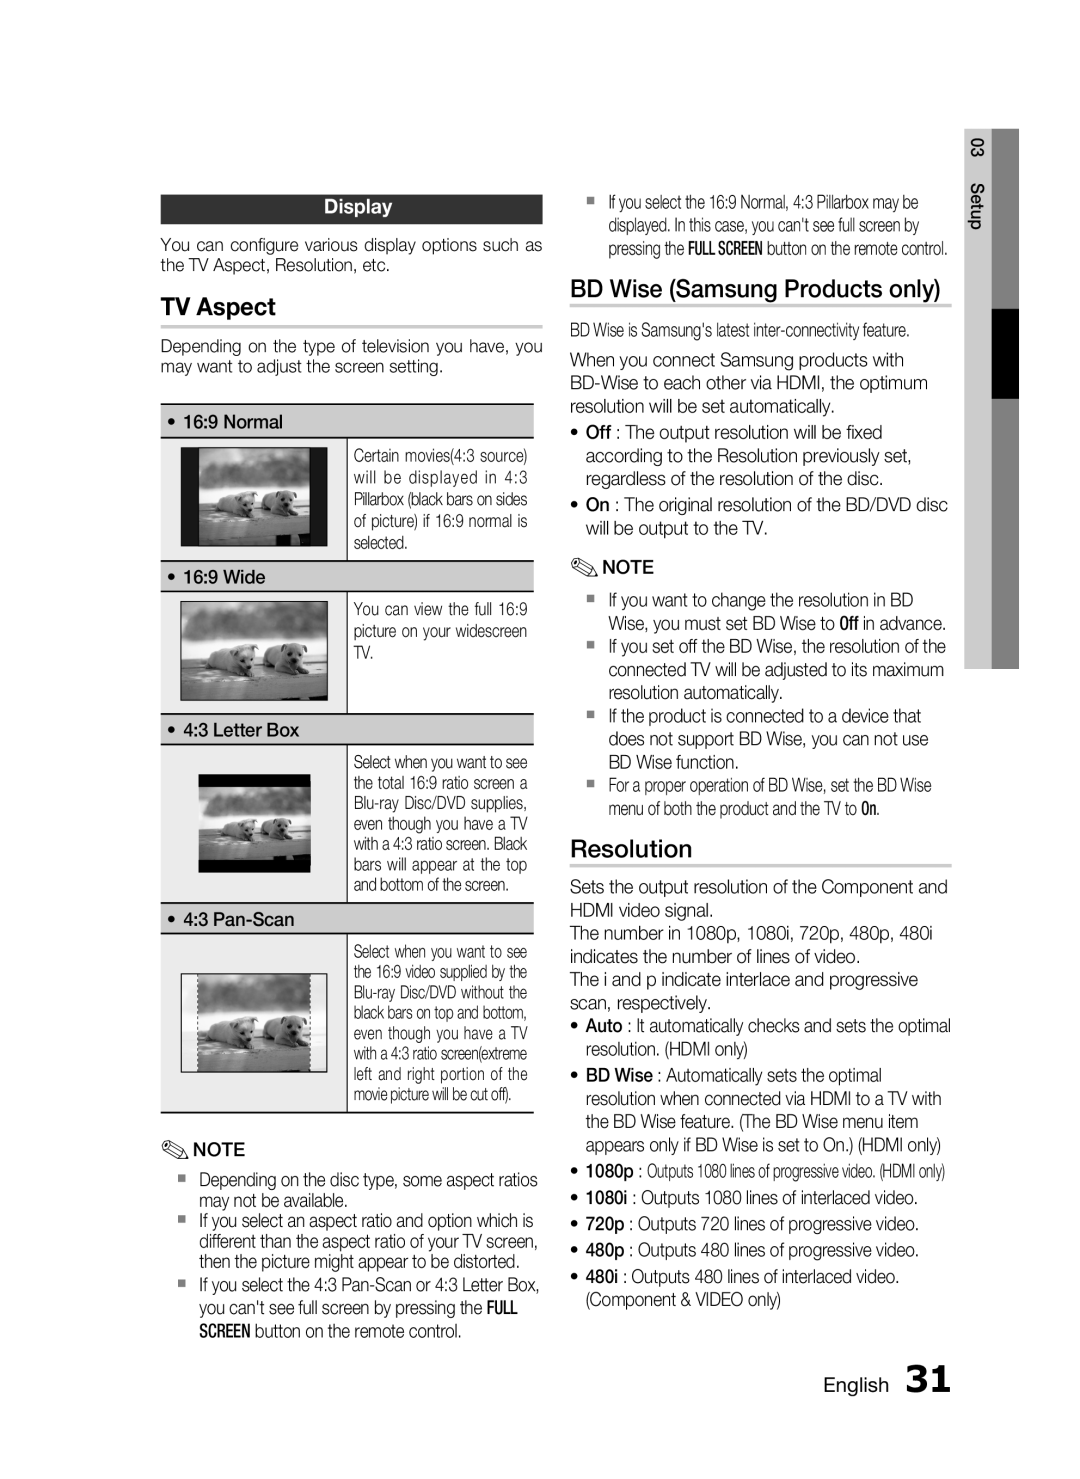 Samsung HT-C6730W, AH68-02290S user manual TV Aspect, BD Wise Samsung Products only, Resolution, Display, English 